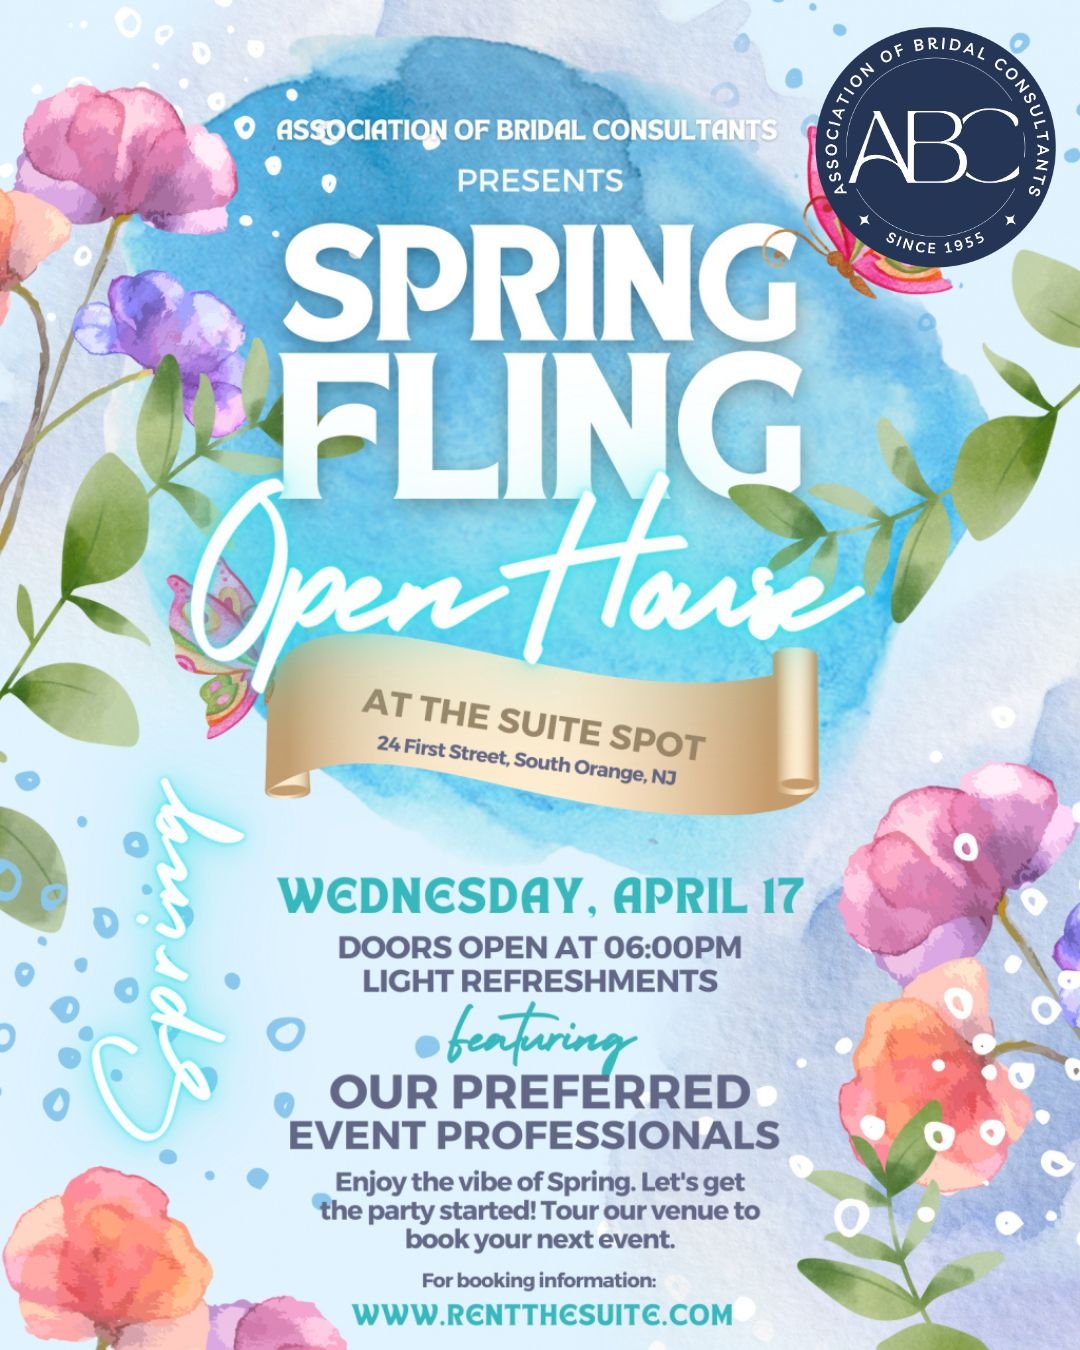 An invitations for all New Jersey Wedding Professionals😊

The Association of Bridal Consultants @abcassoc welcomes you to our Spring Fling Open House at The Suite Spot! Join us for a fun-filled time of exploring this venue space, meeting our team, a